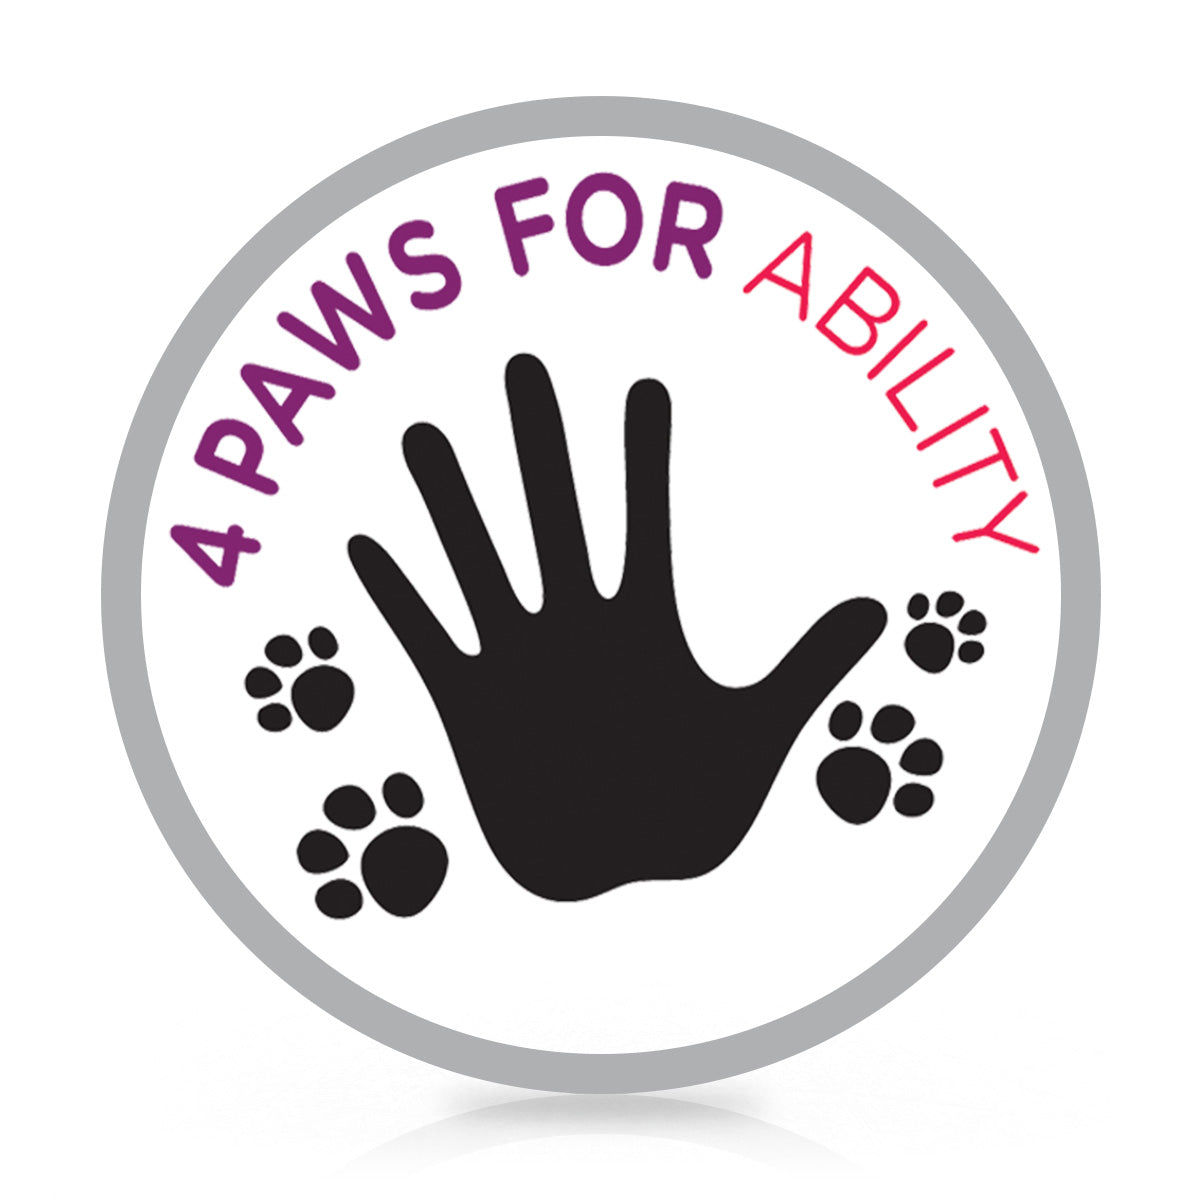 4 Paws for Ability Donation Charity 1.0 - ROAD iD